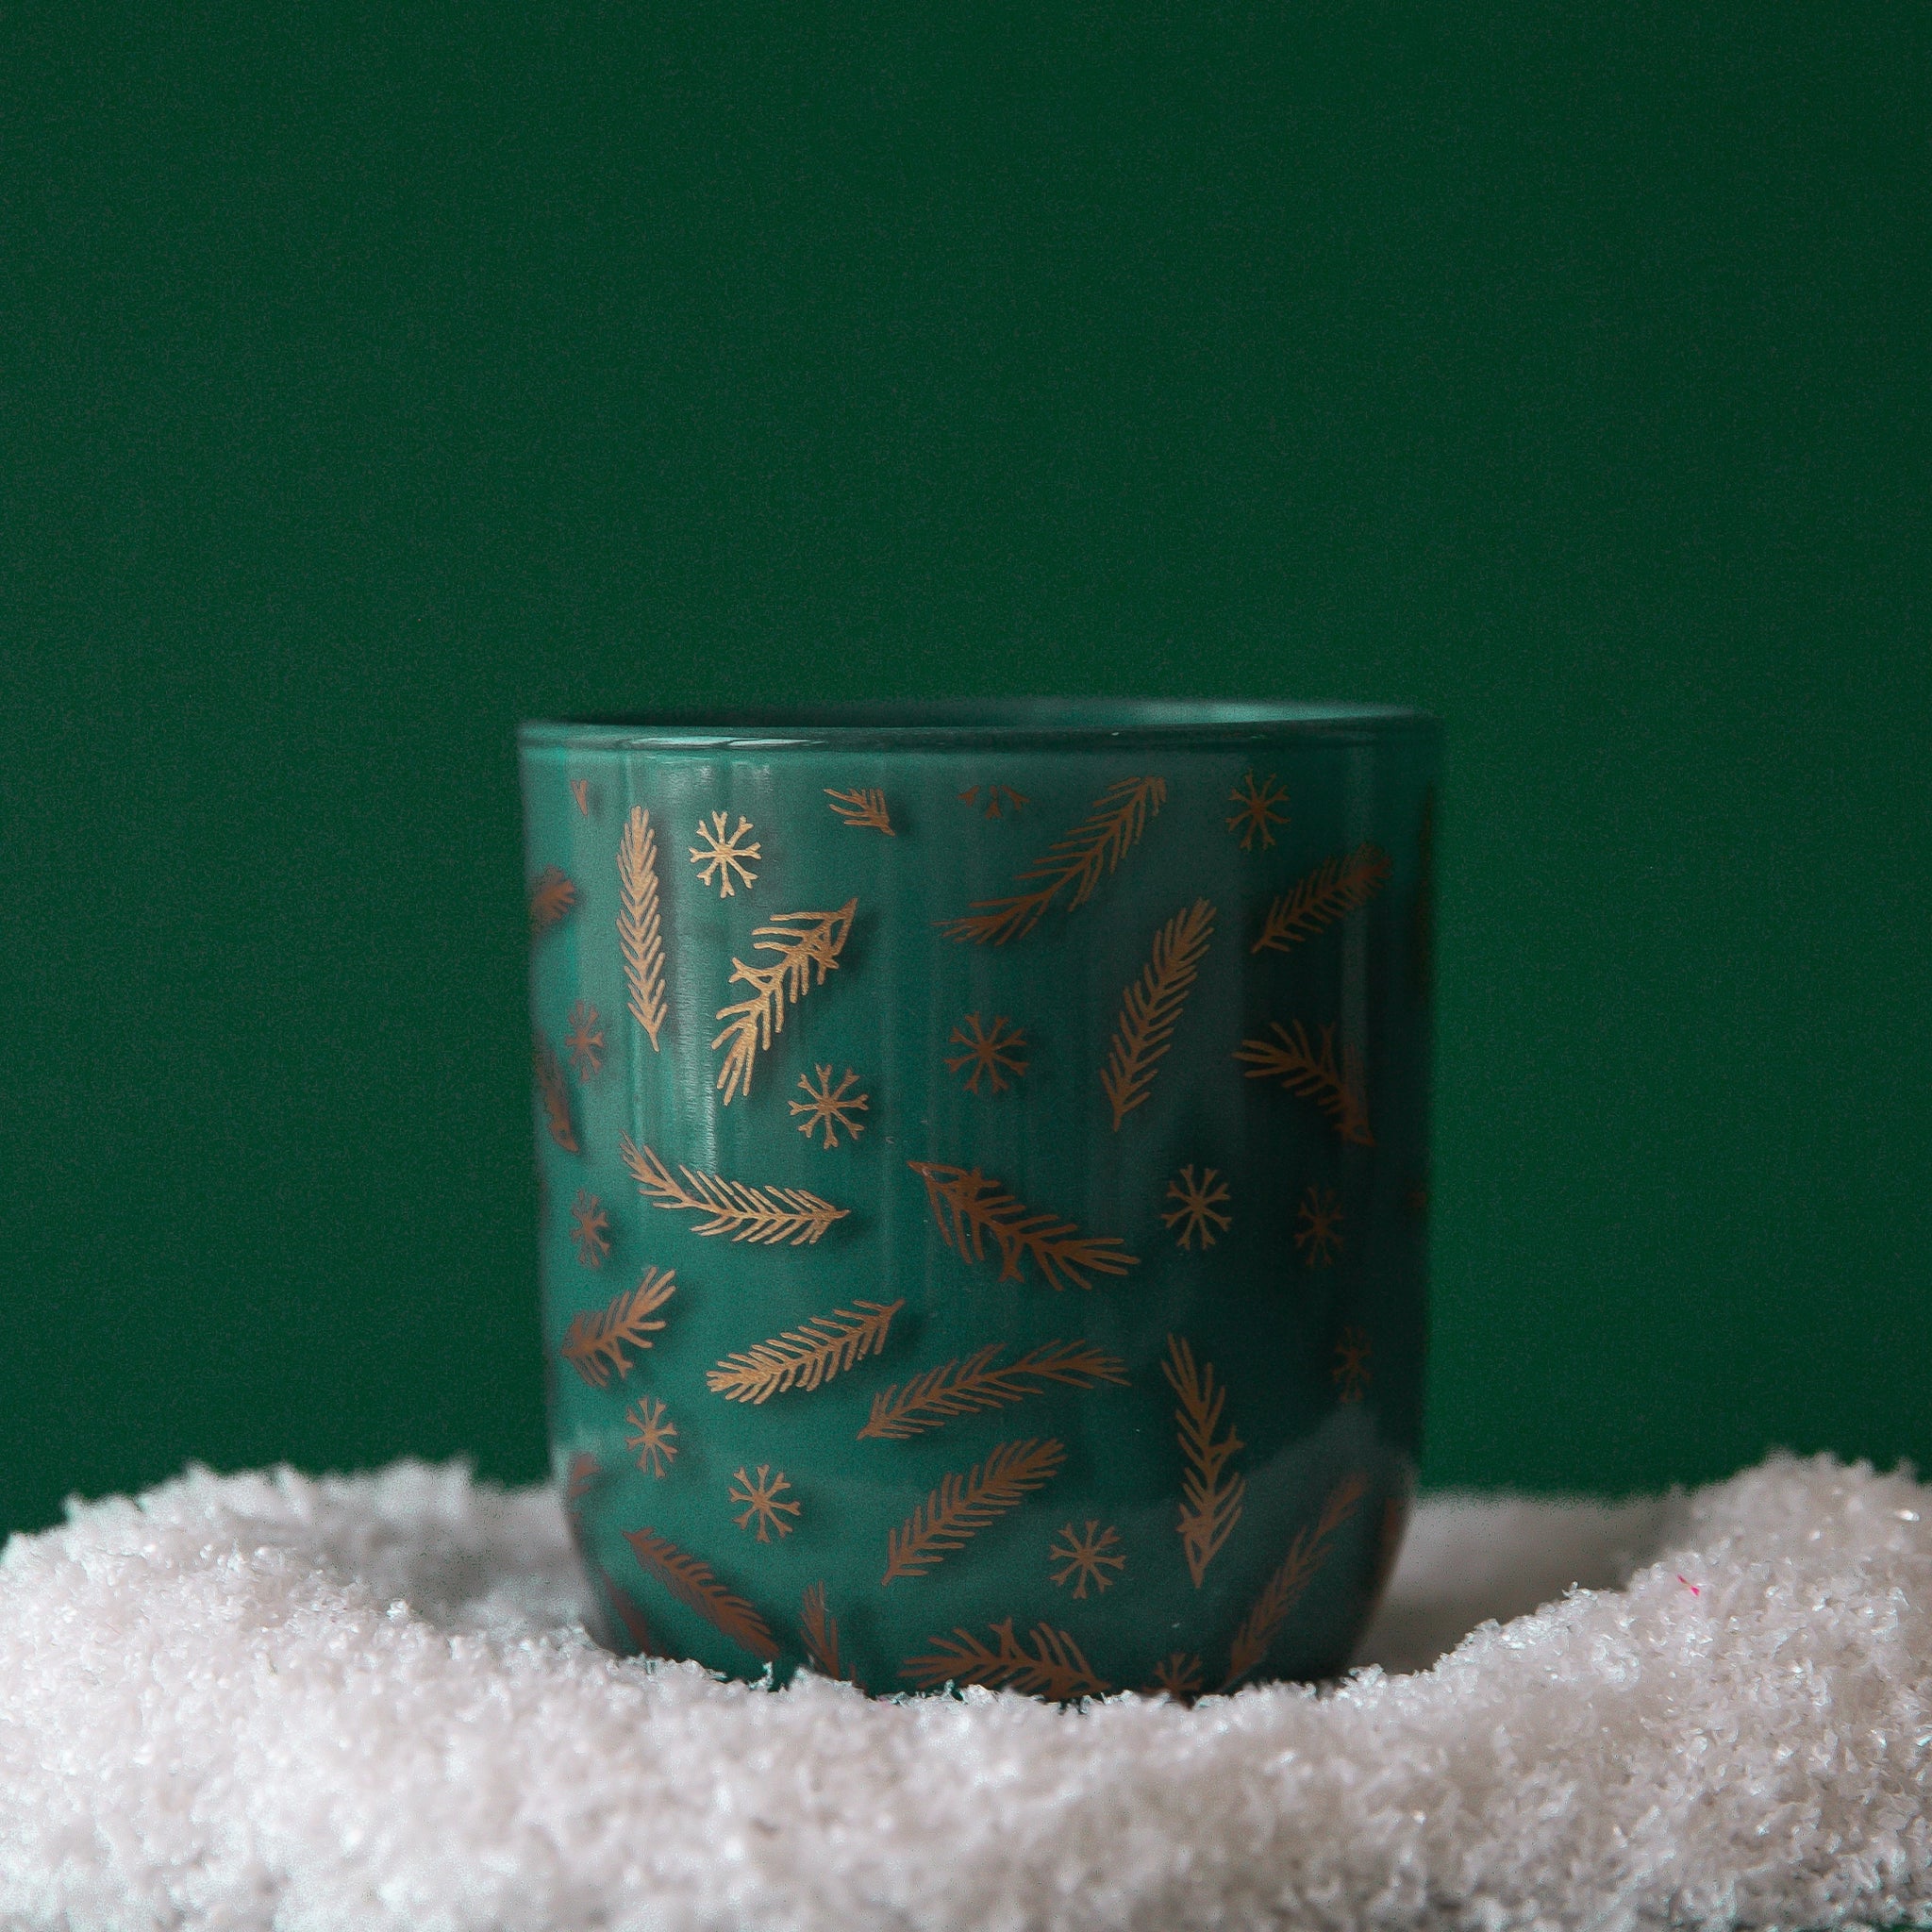 On a green background is a green and gold glass candle with a snowflake and pine needle pattern.